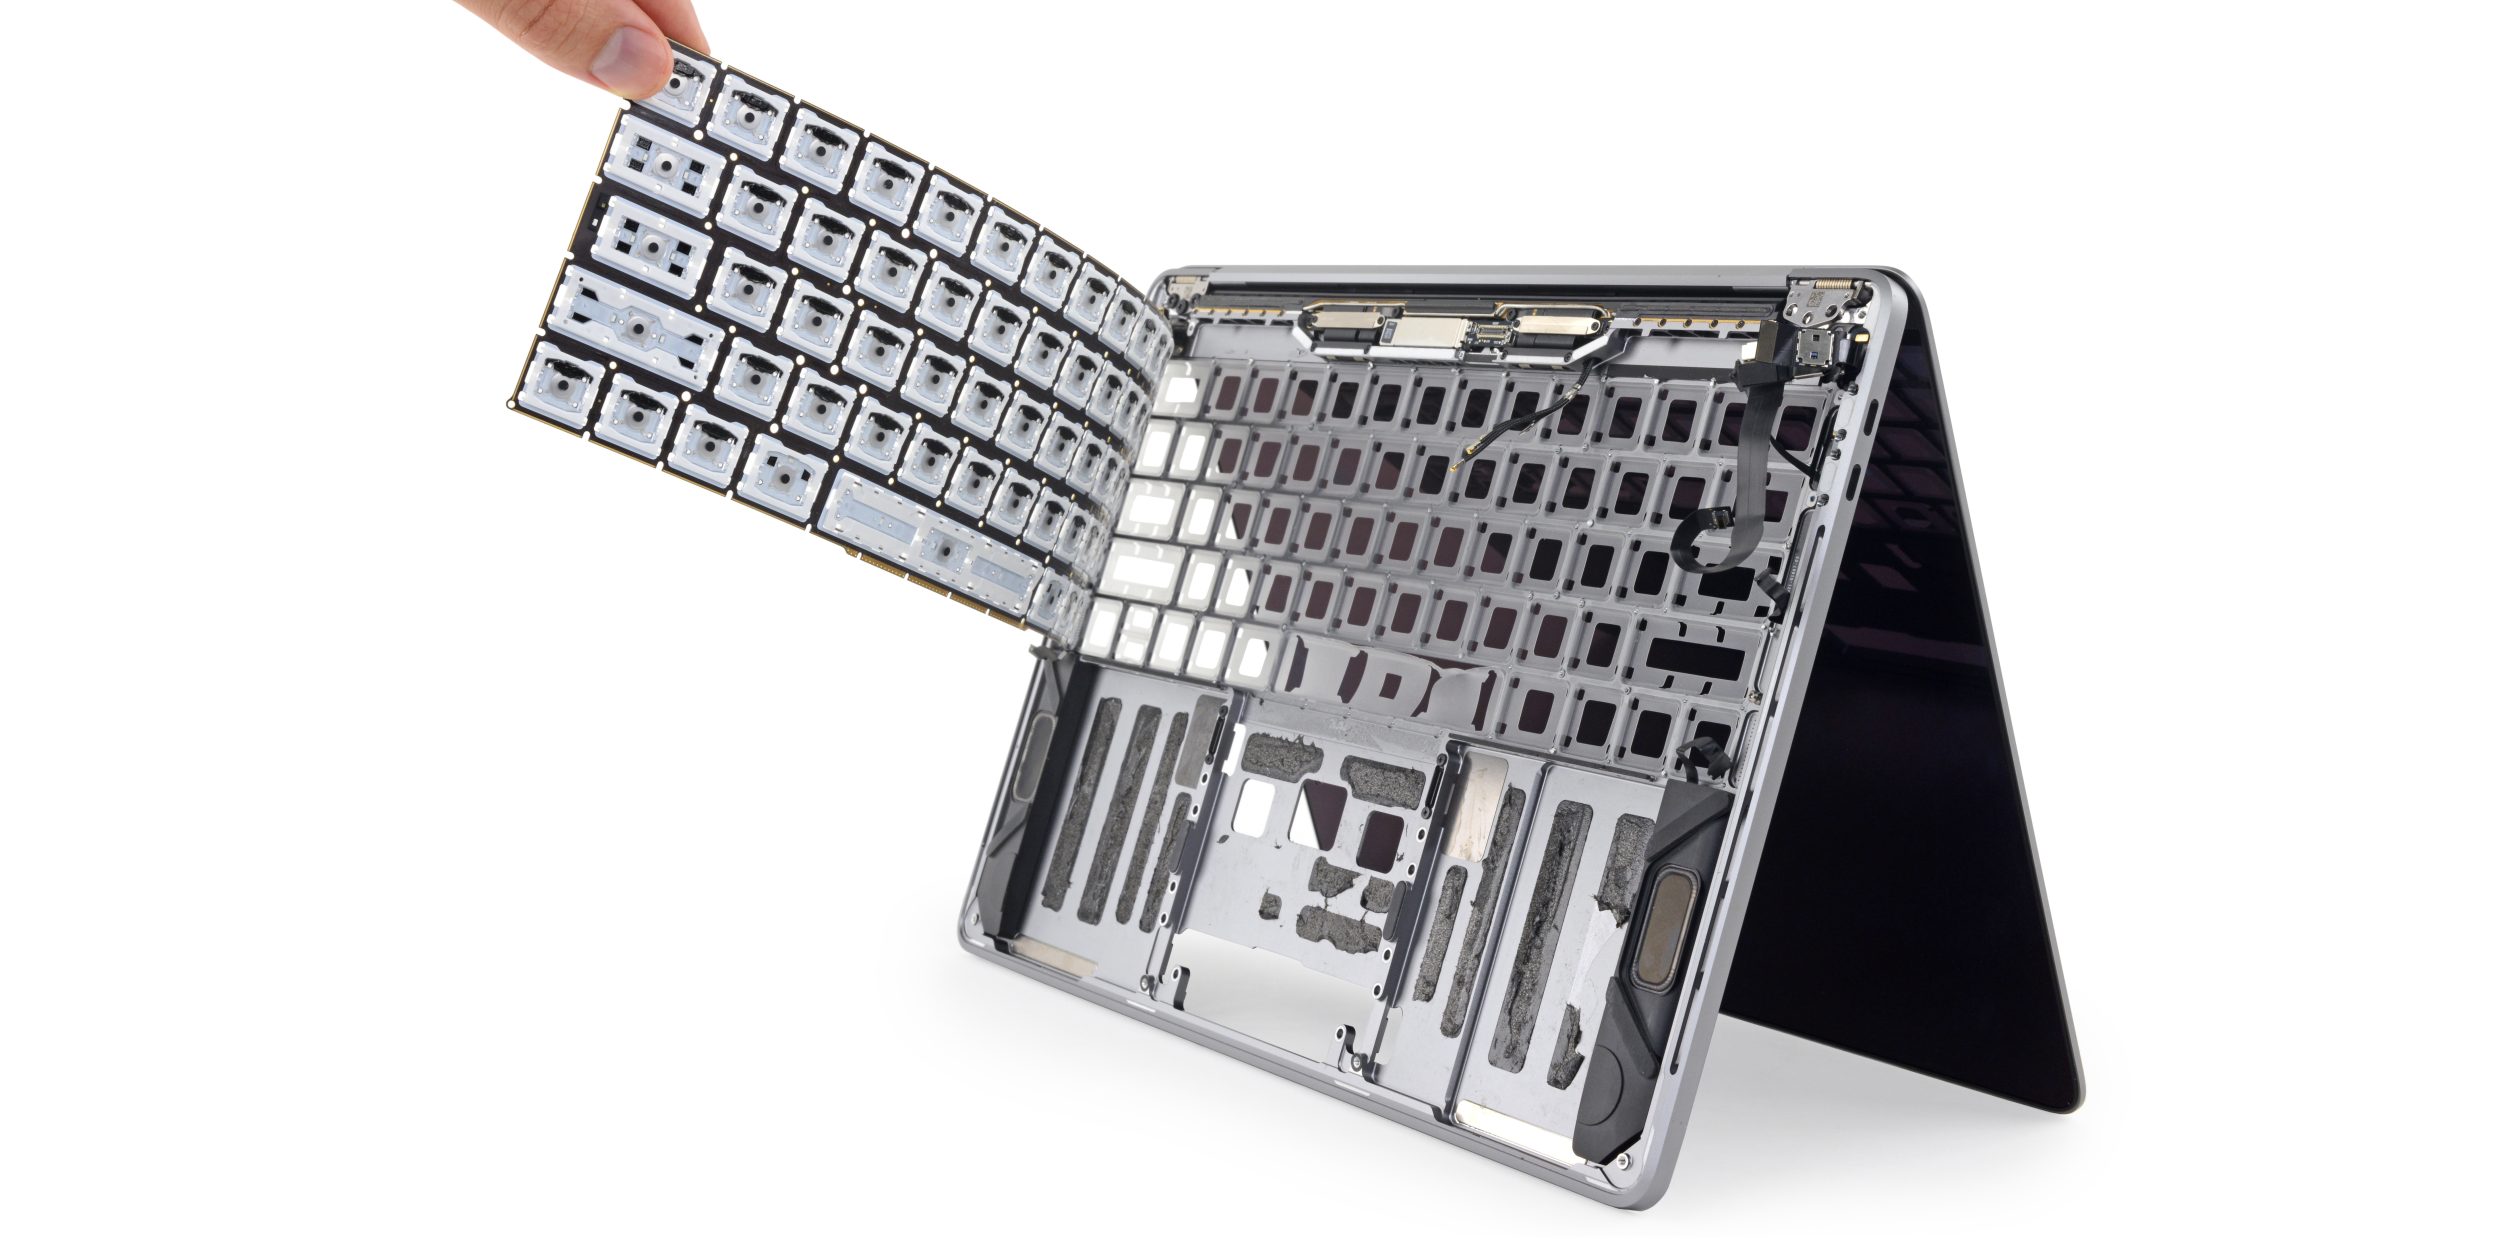 How to get apple to replace 2017 macbook pro keyboard baby swing at walmart